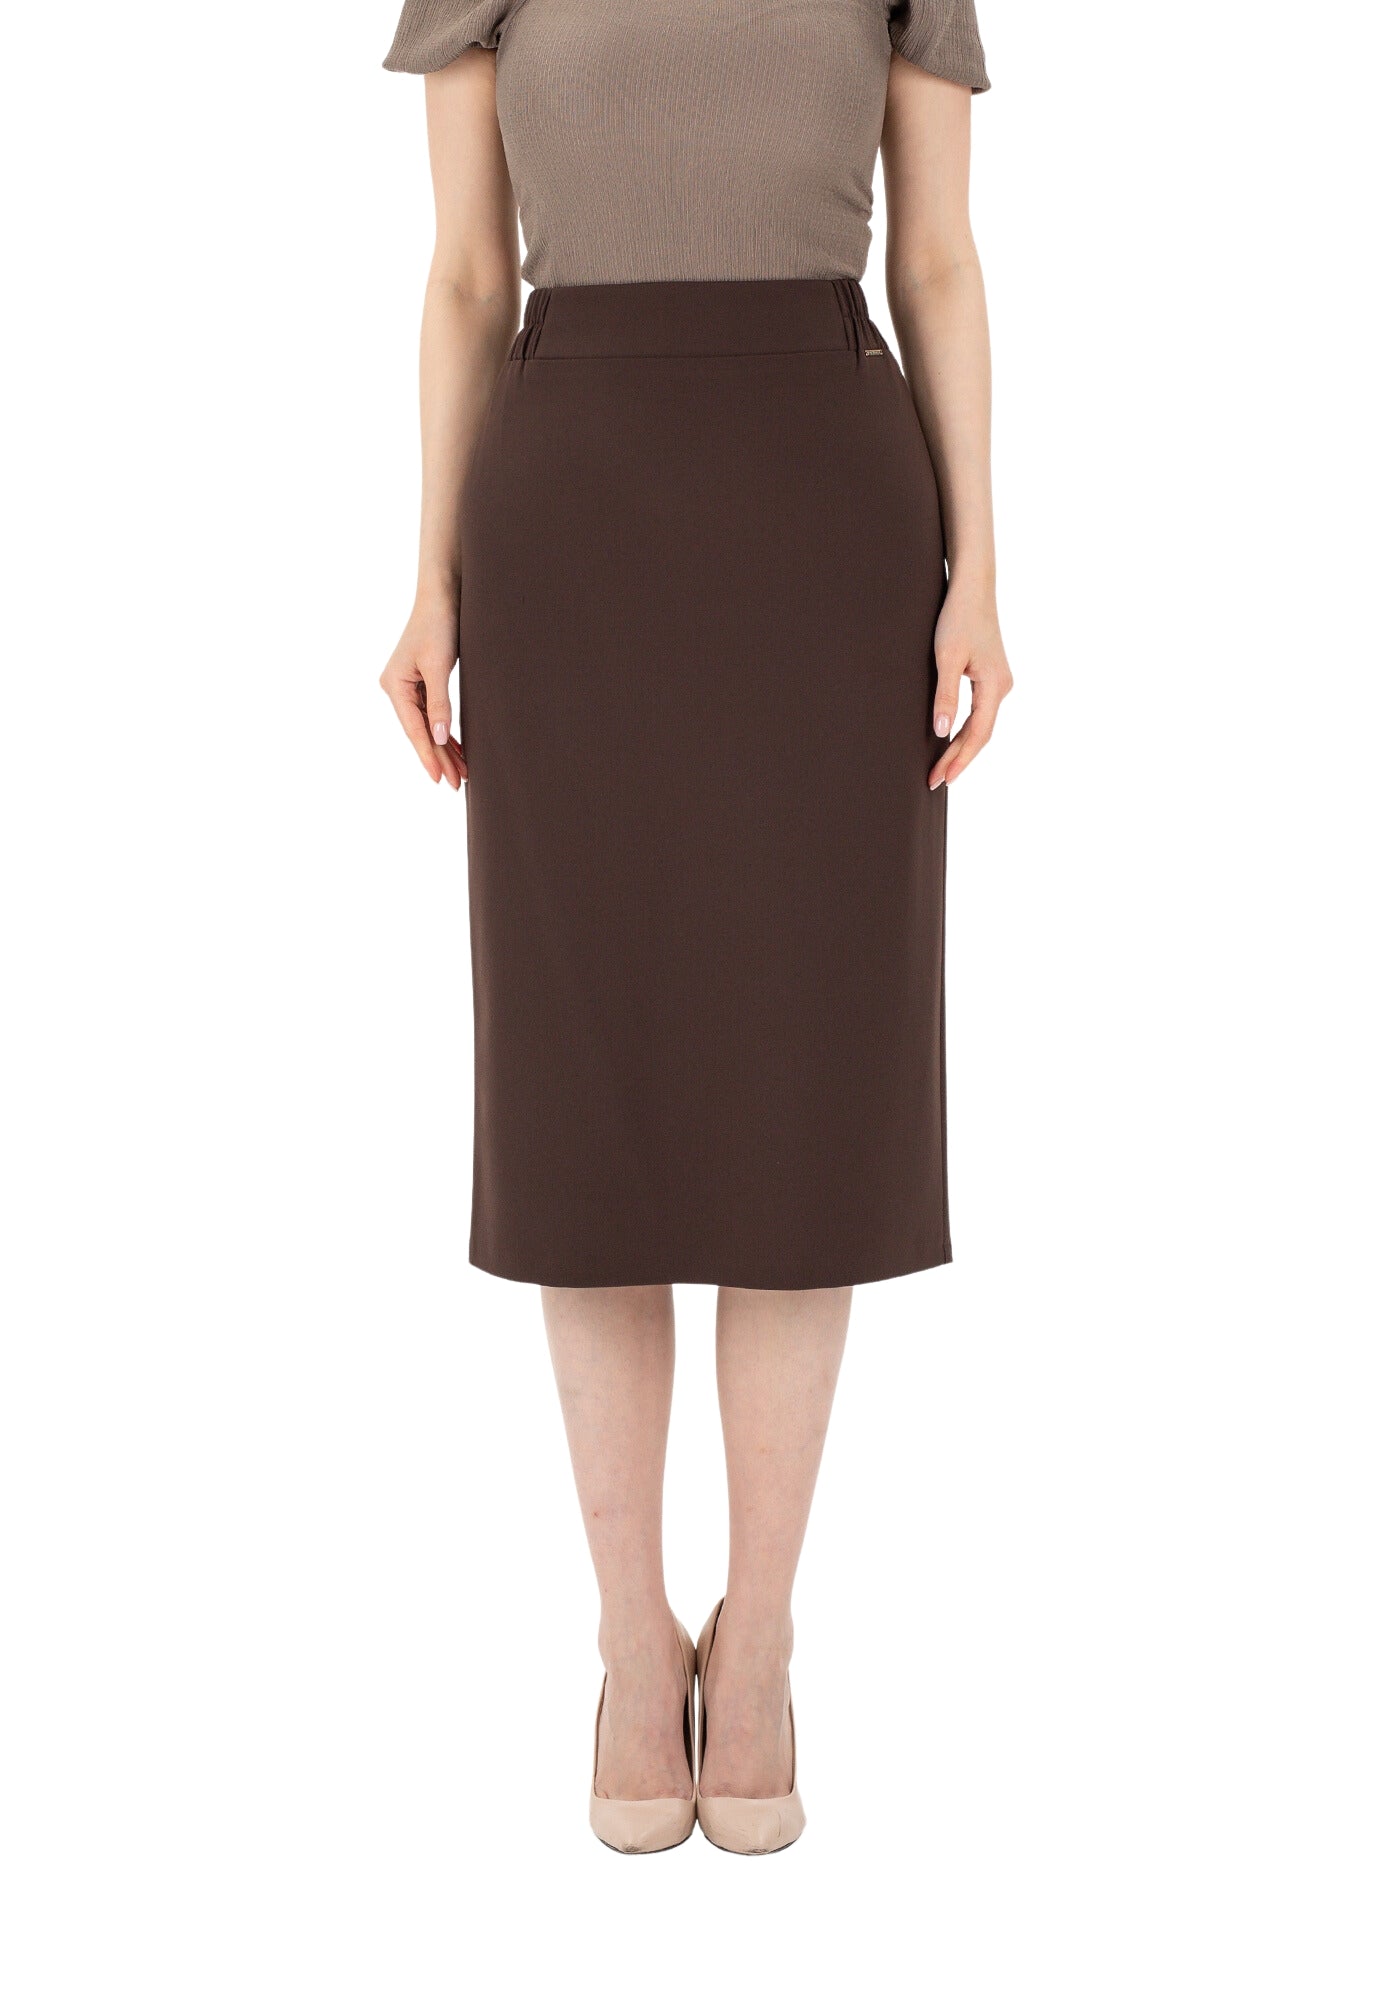 Brown Midi Pencil Skirt with Elastic Waist and Closed Back Vent G-Line